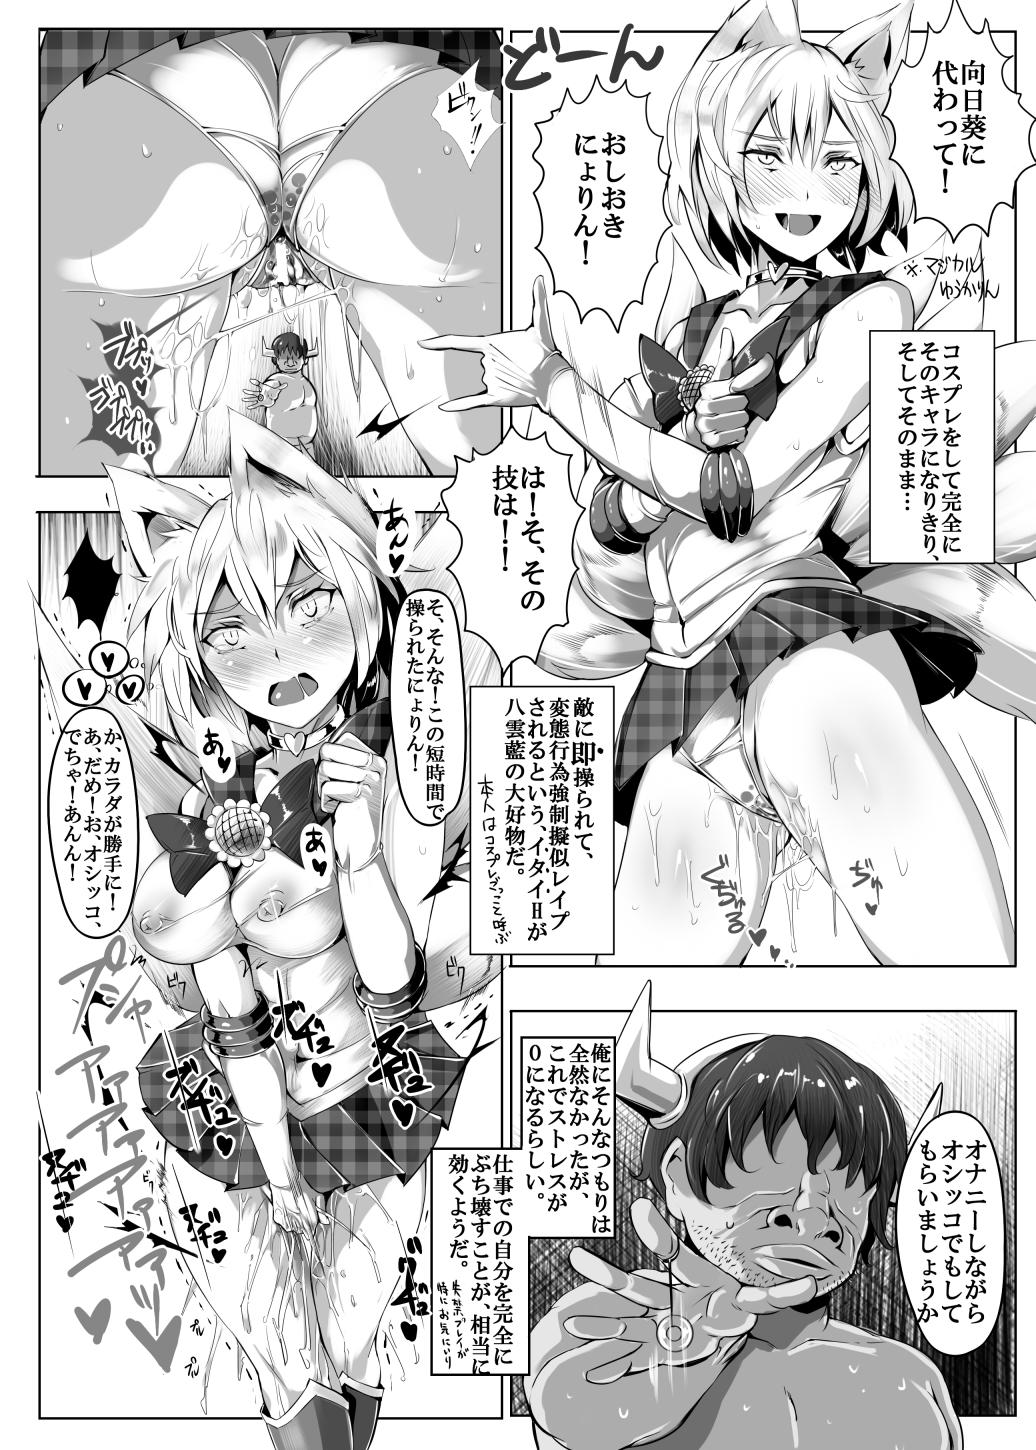 Flaquita Cool Beauty Ran - Touhou project Ffm - Page 6